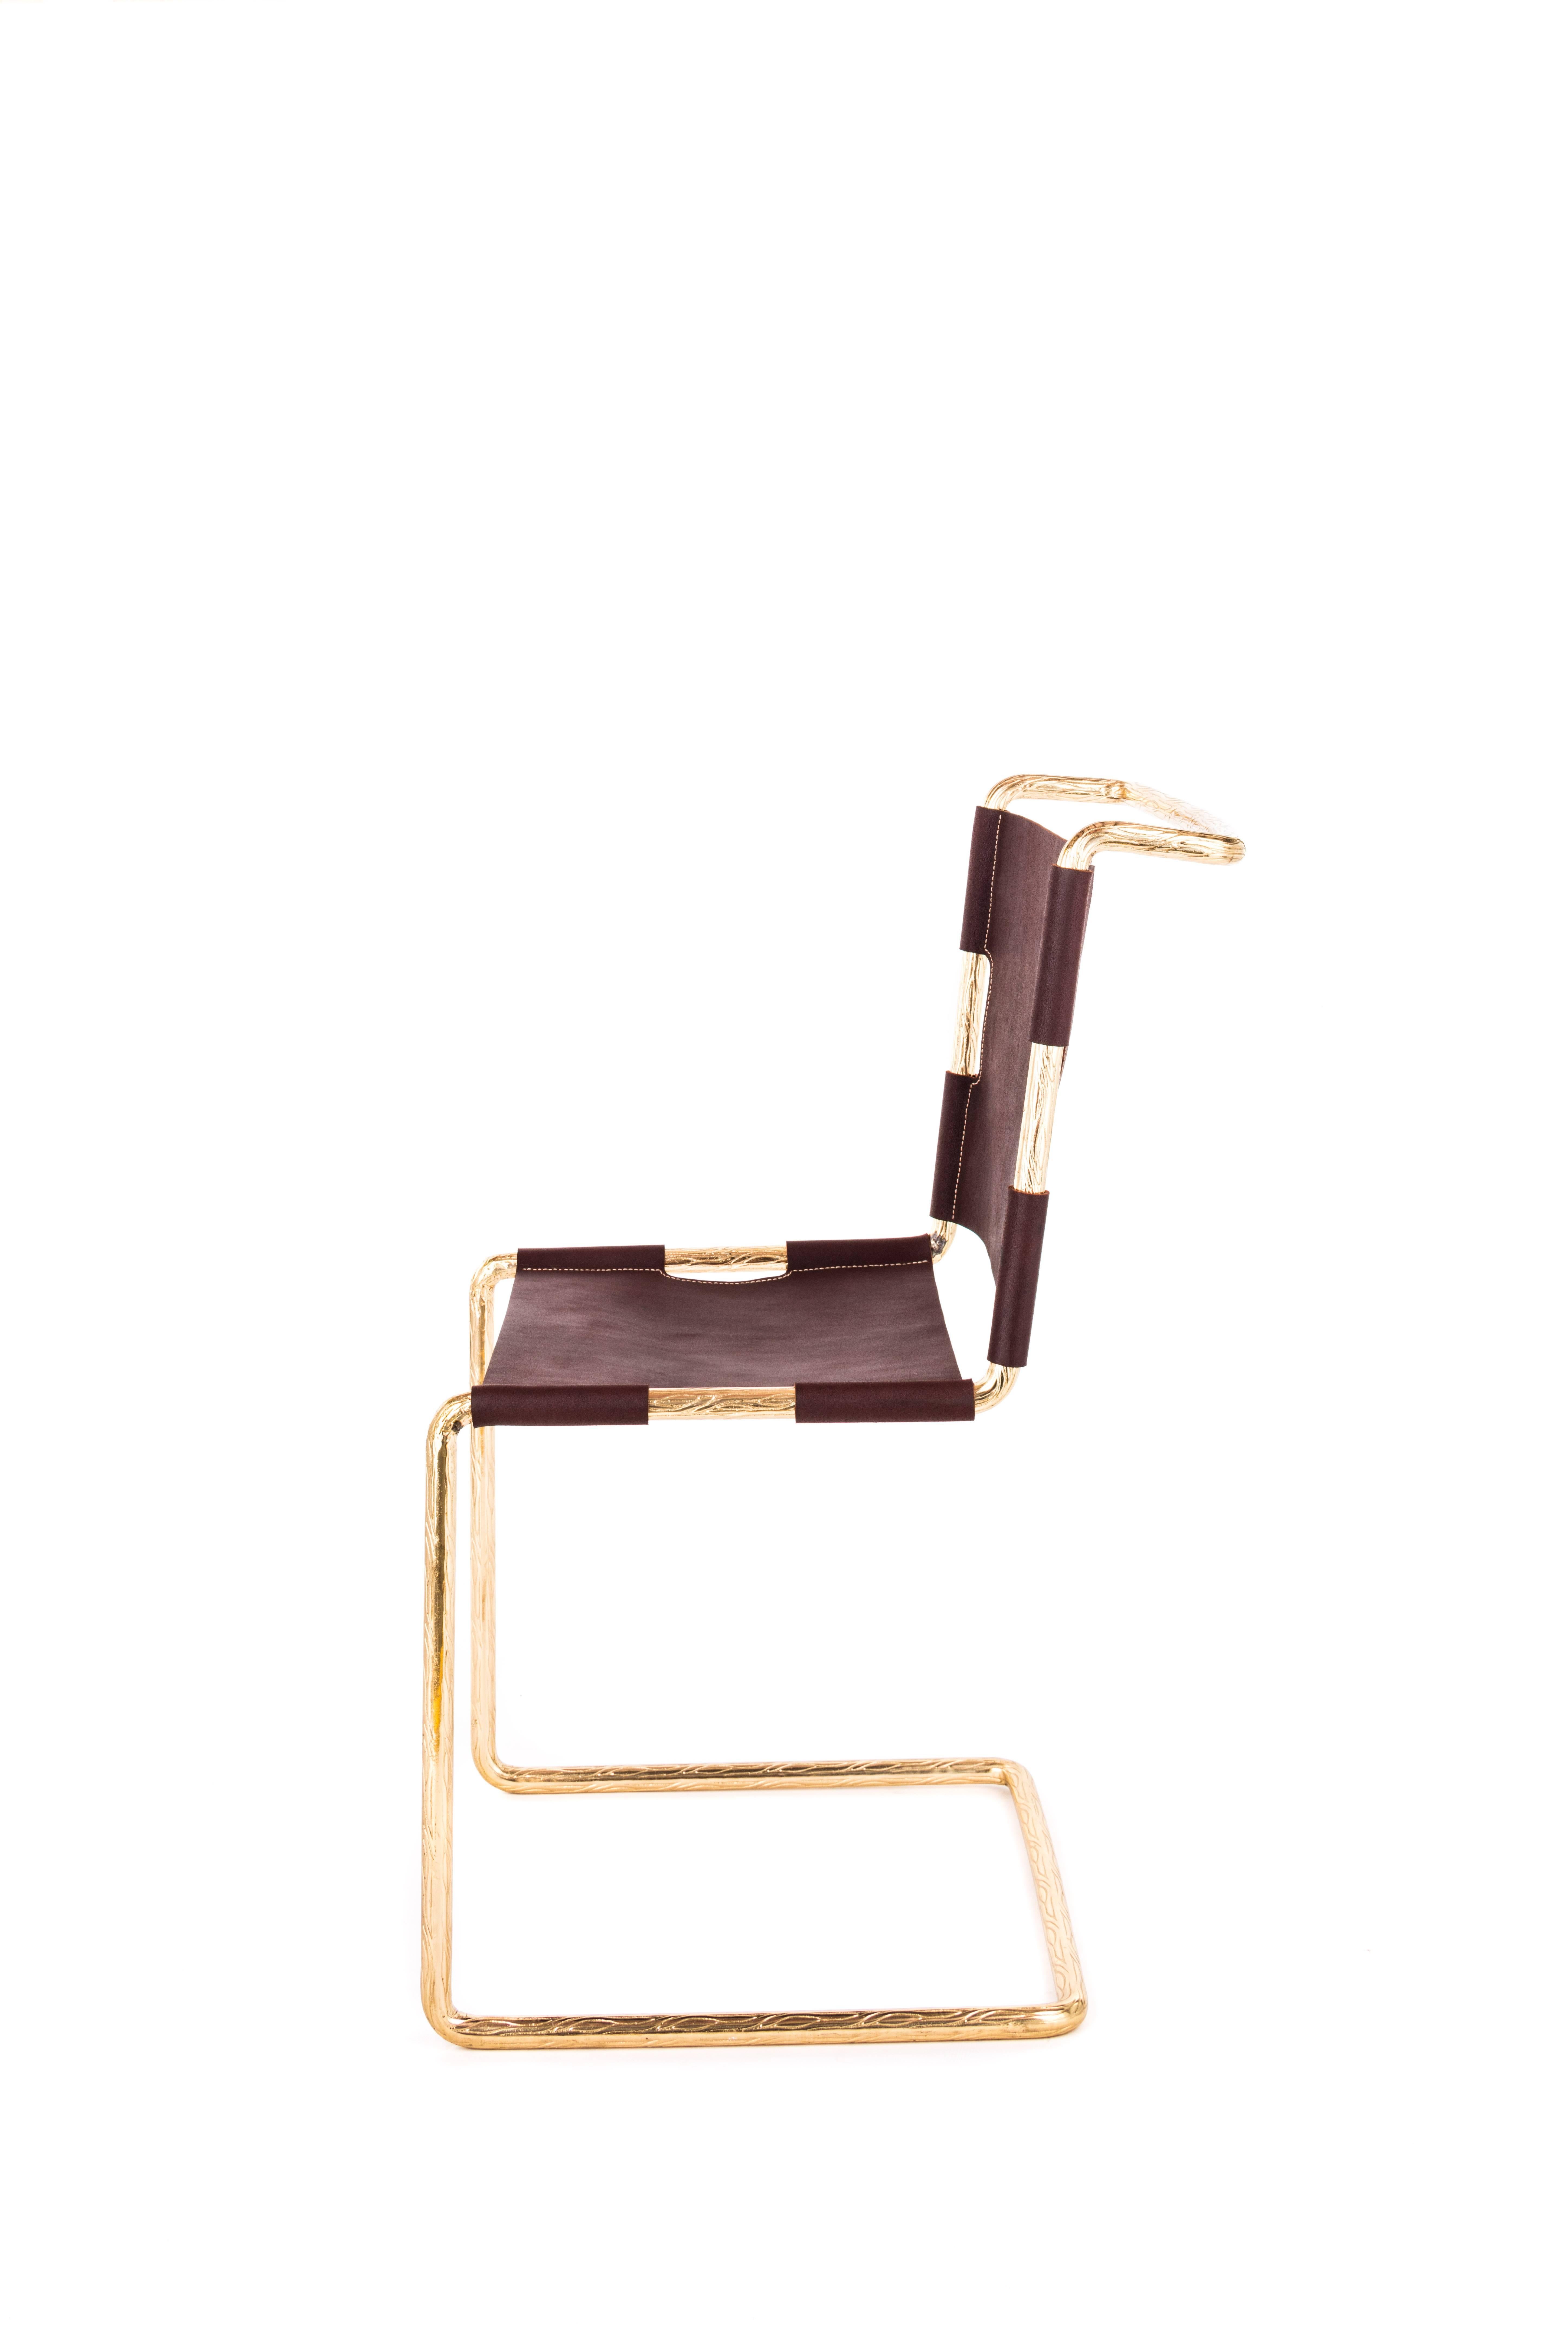 Hand-Crafted Chair With Brass Finish And Water Buffalo Leather For Sale